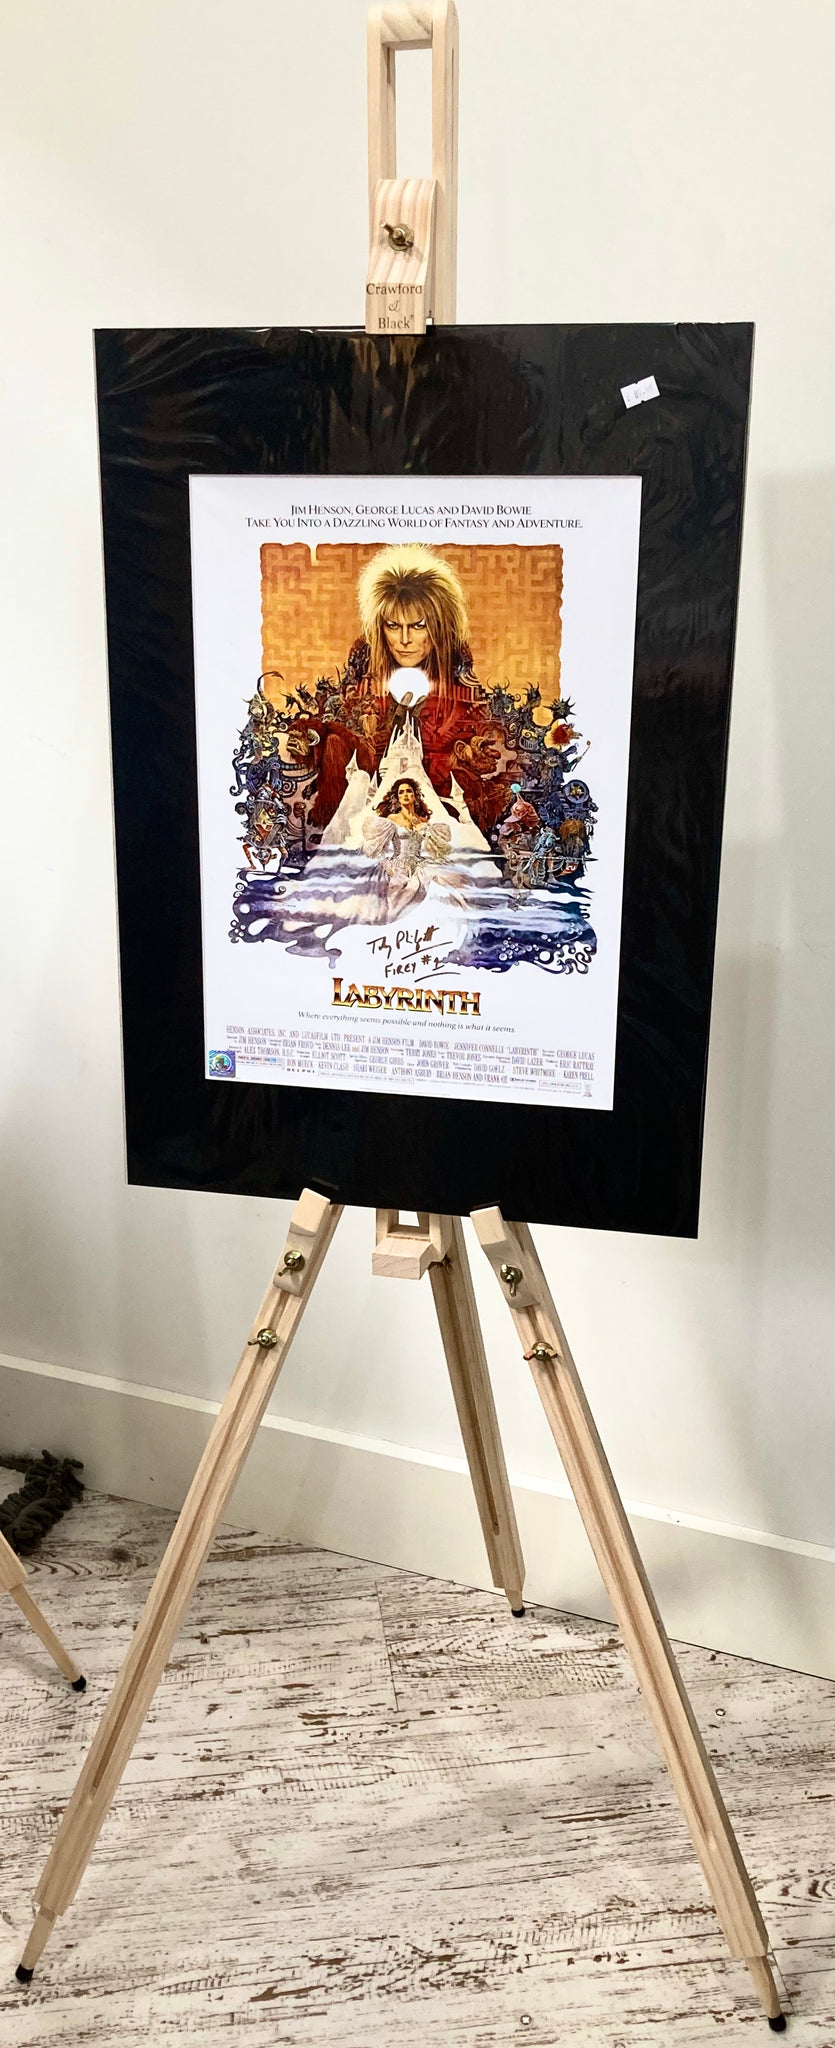 Labyrinth Toby Philpott Autographed Film Poster with Triple Layer Authenticity